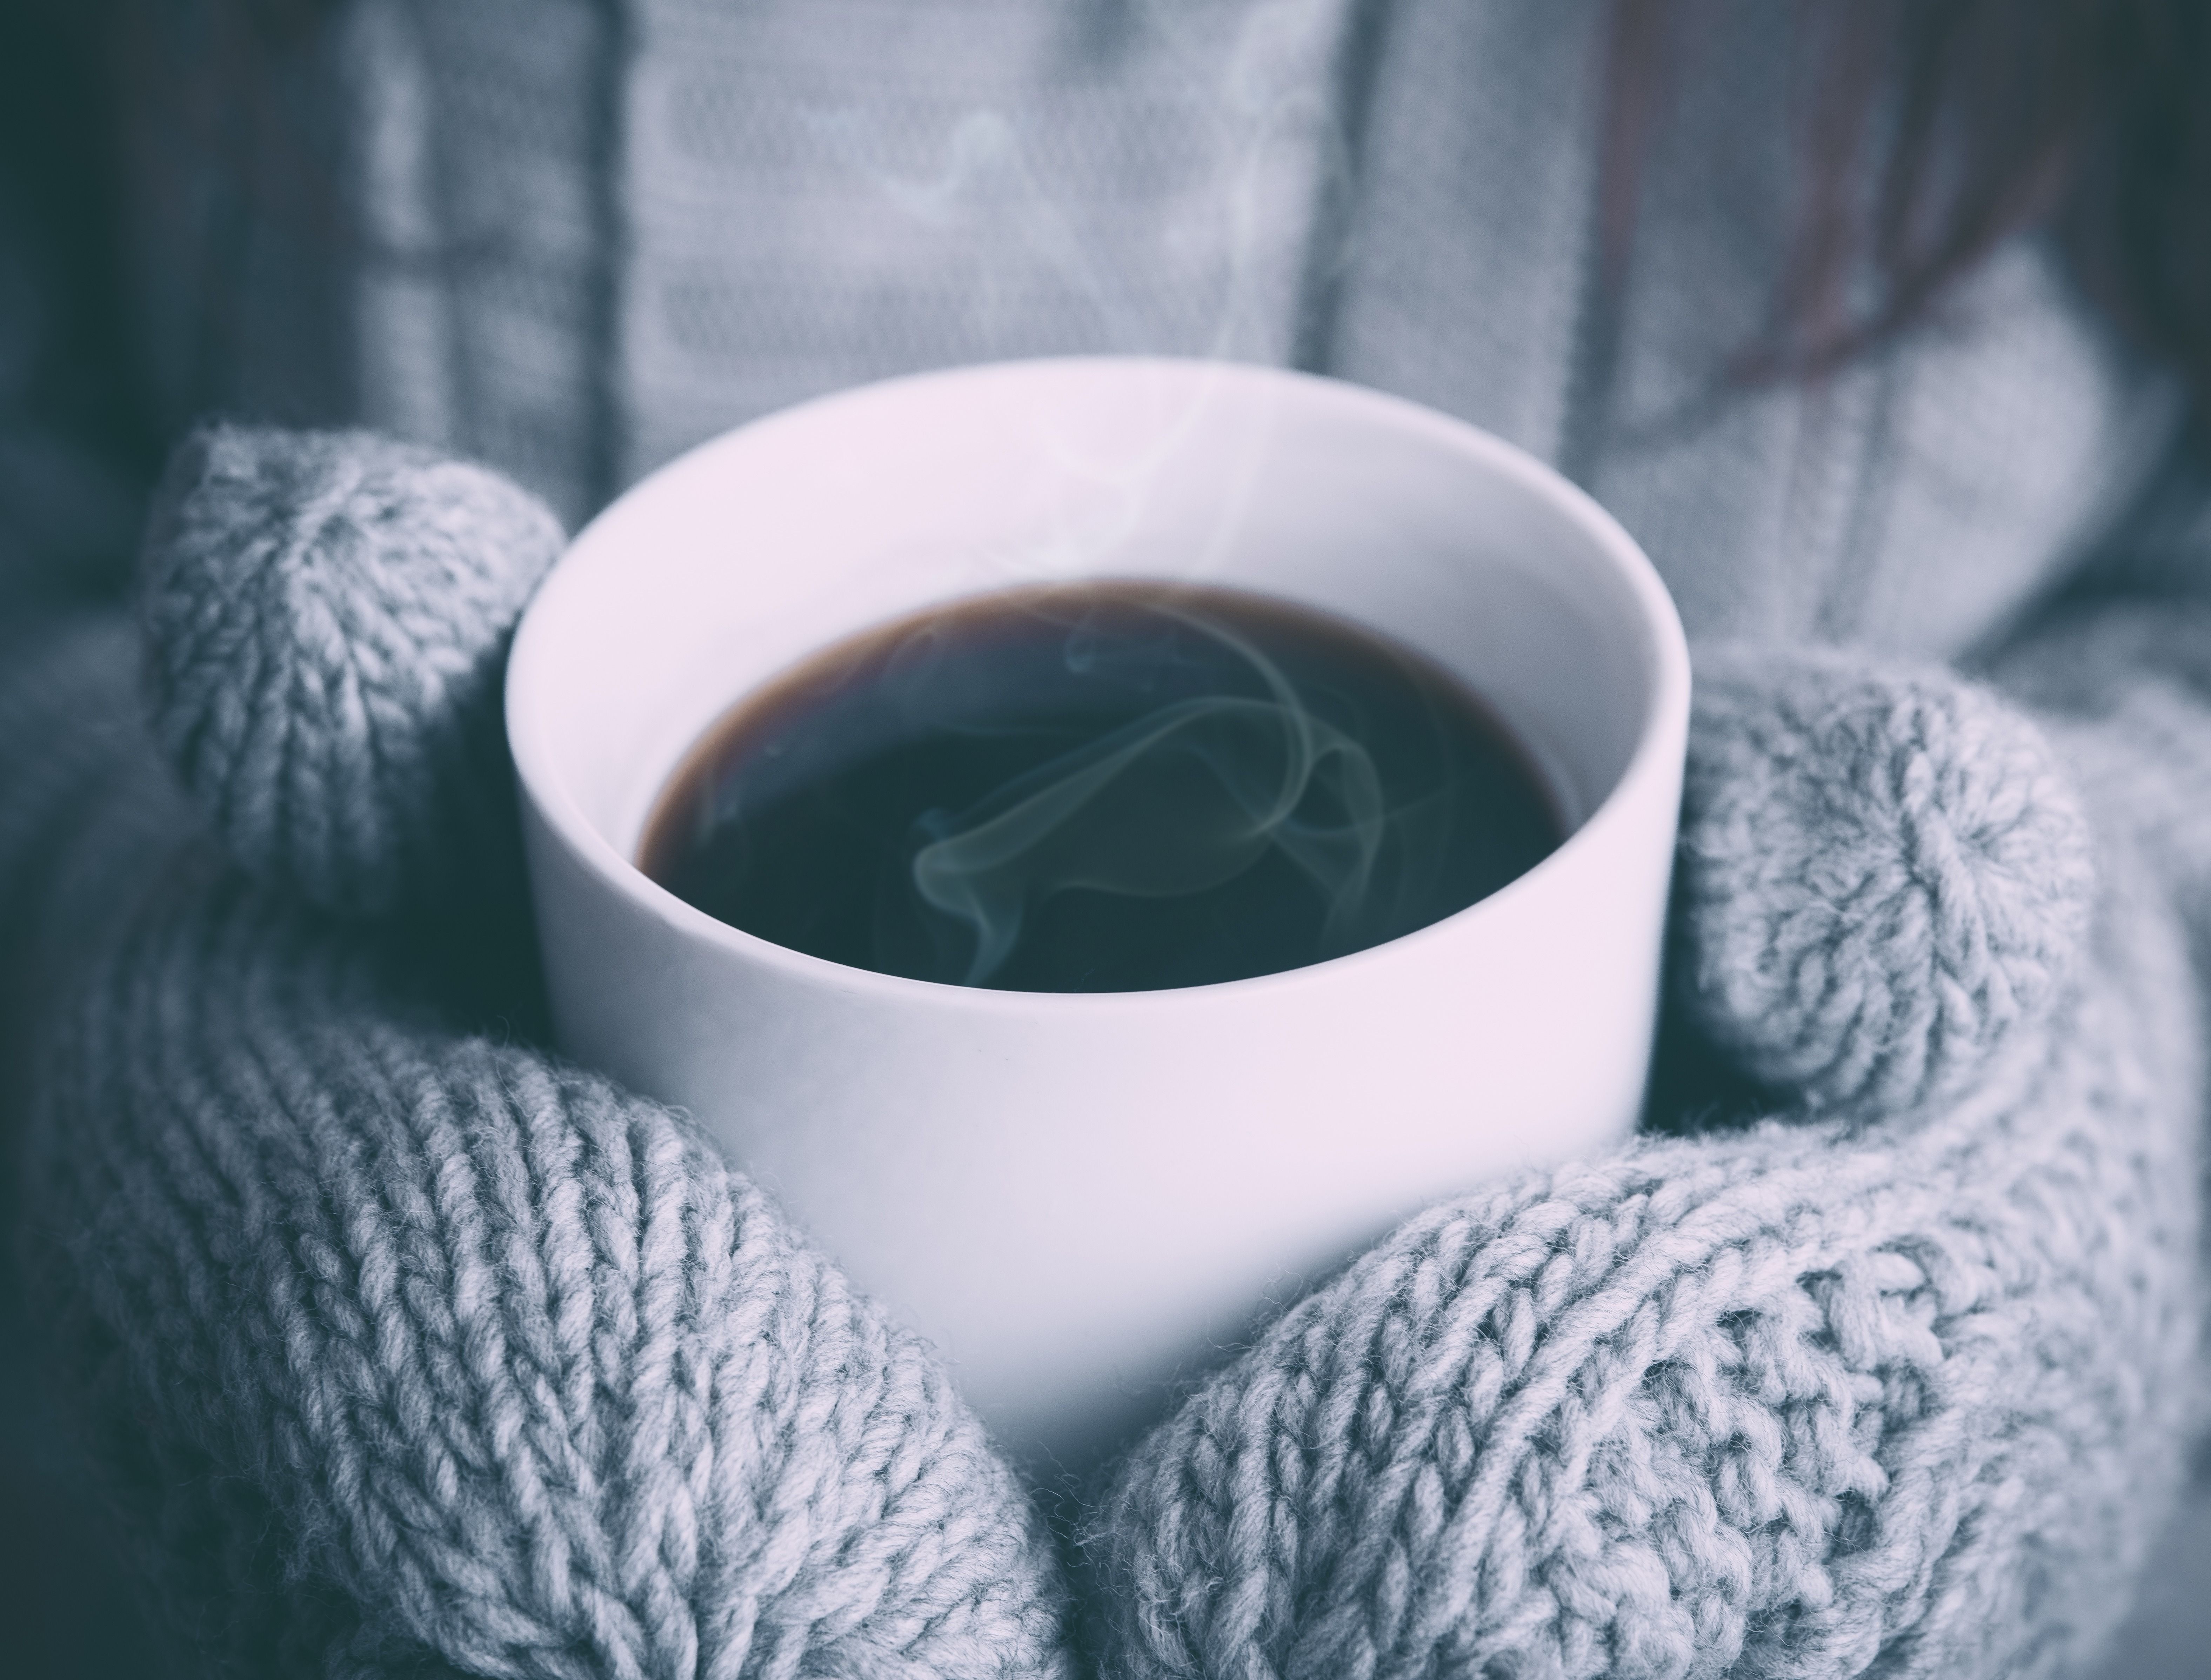 Winter Cold Coffee Wallpaper.com. Best High Quality